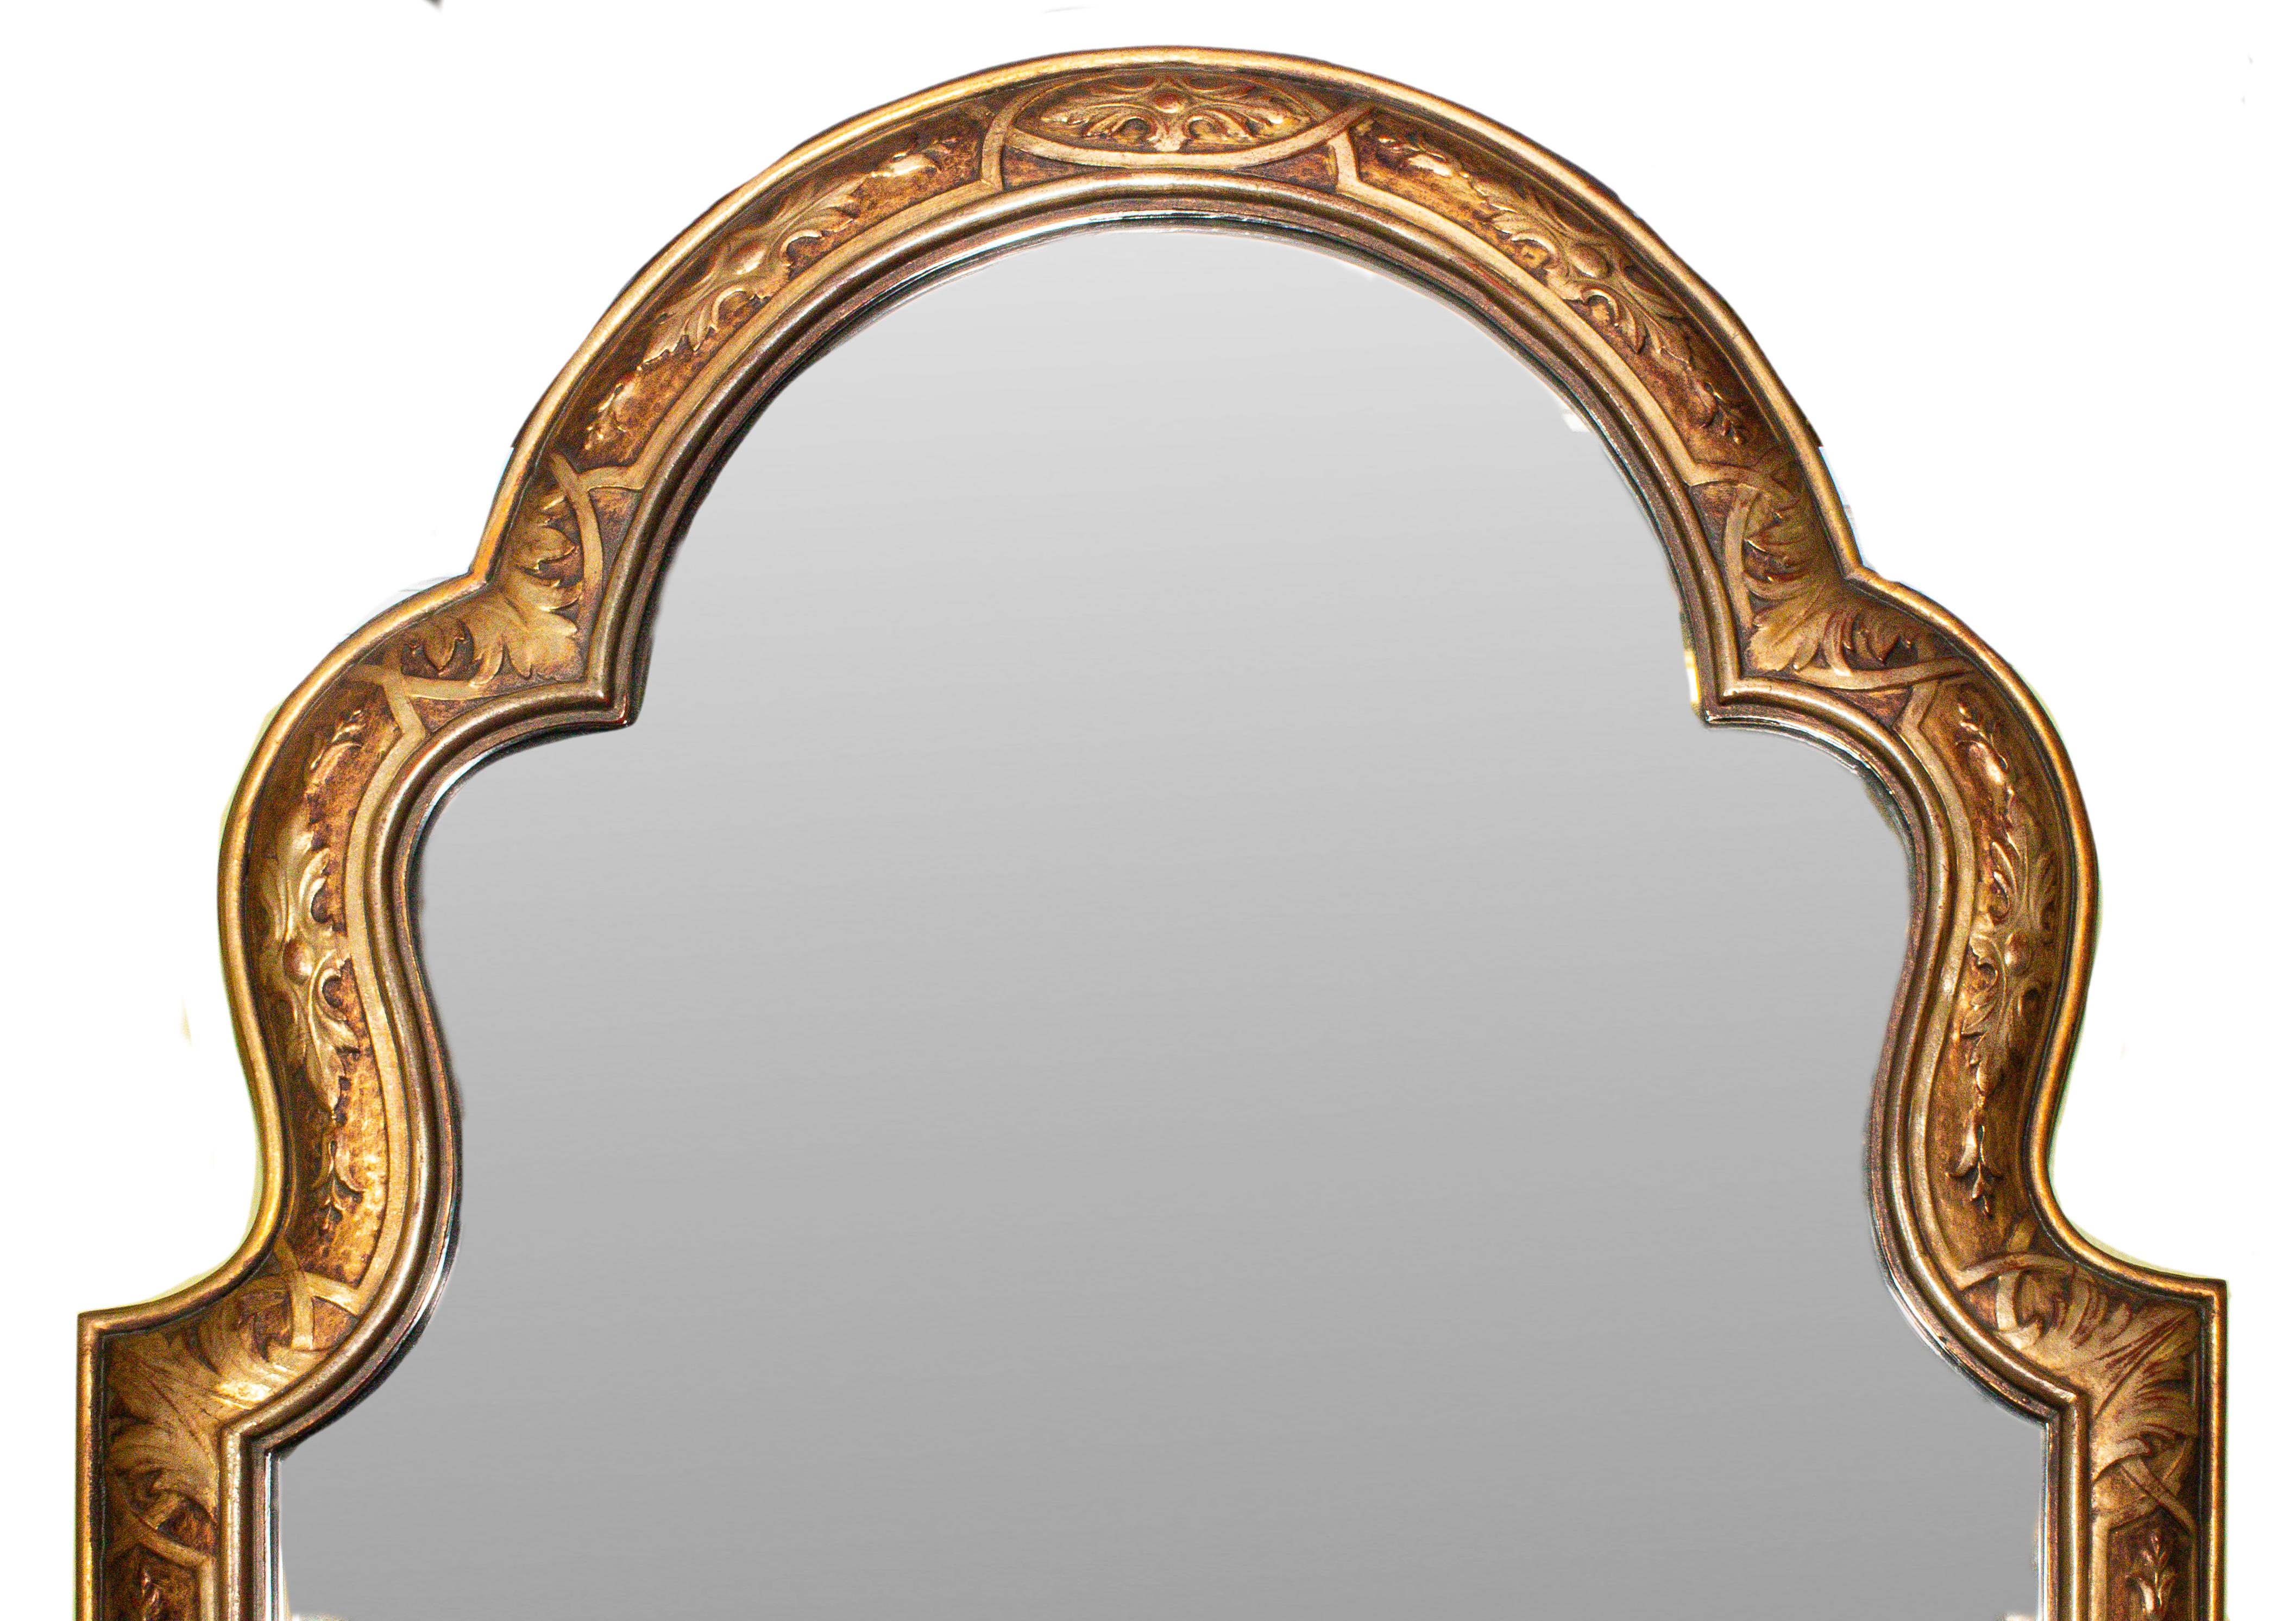 Hand carved shaped Chinese Chippendale style wood mirror with gold and silver finish. Made in Italy in the 1970s.